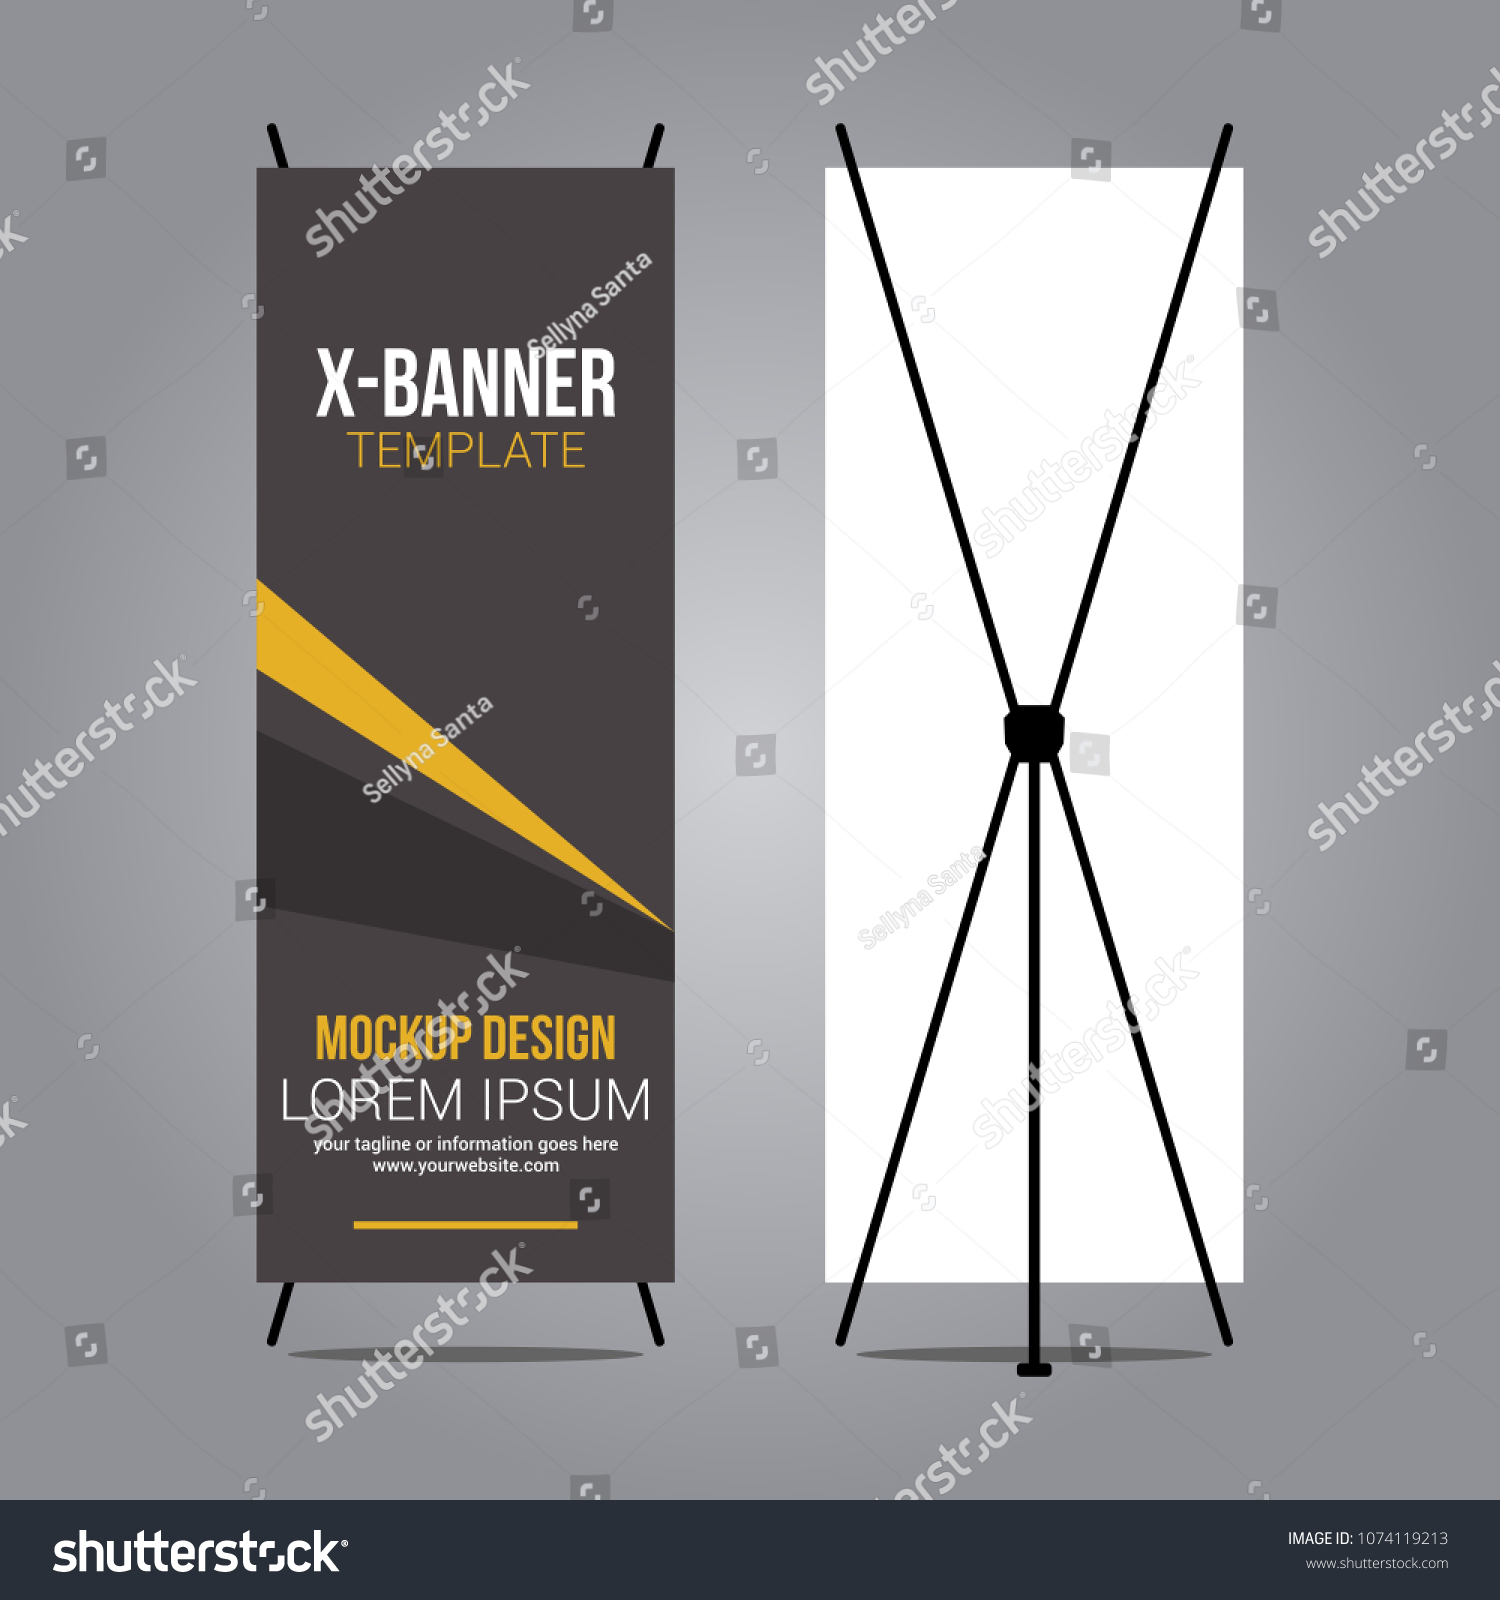 Download Stand Xbanner Mockup Abstract Design Template Stock Vector Royalty Free 1074119213